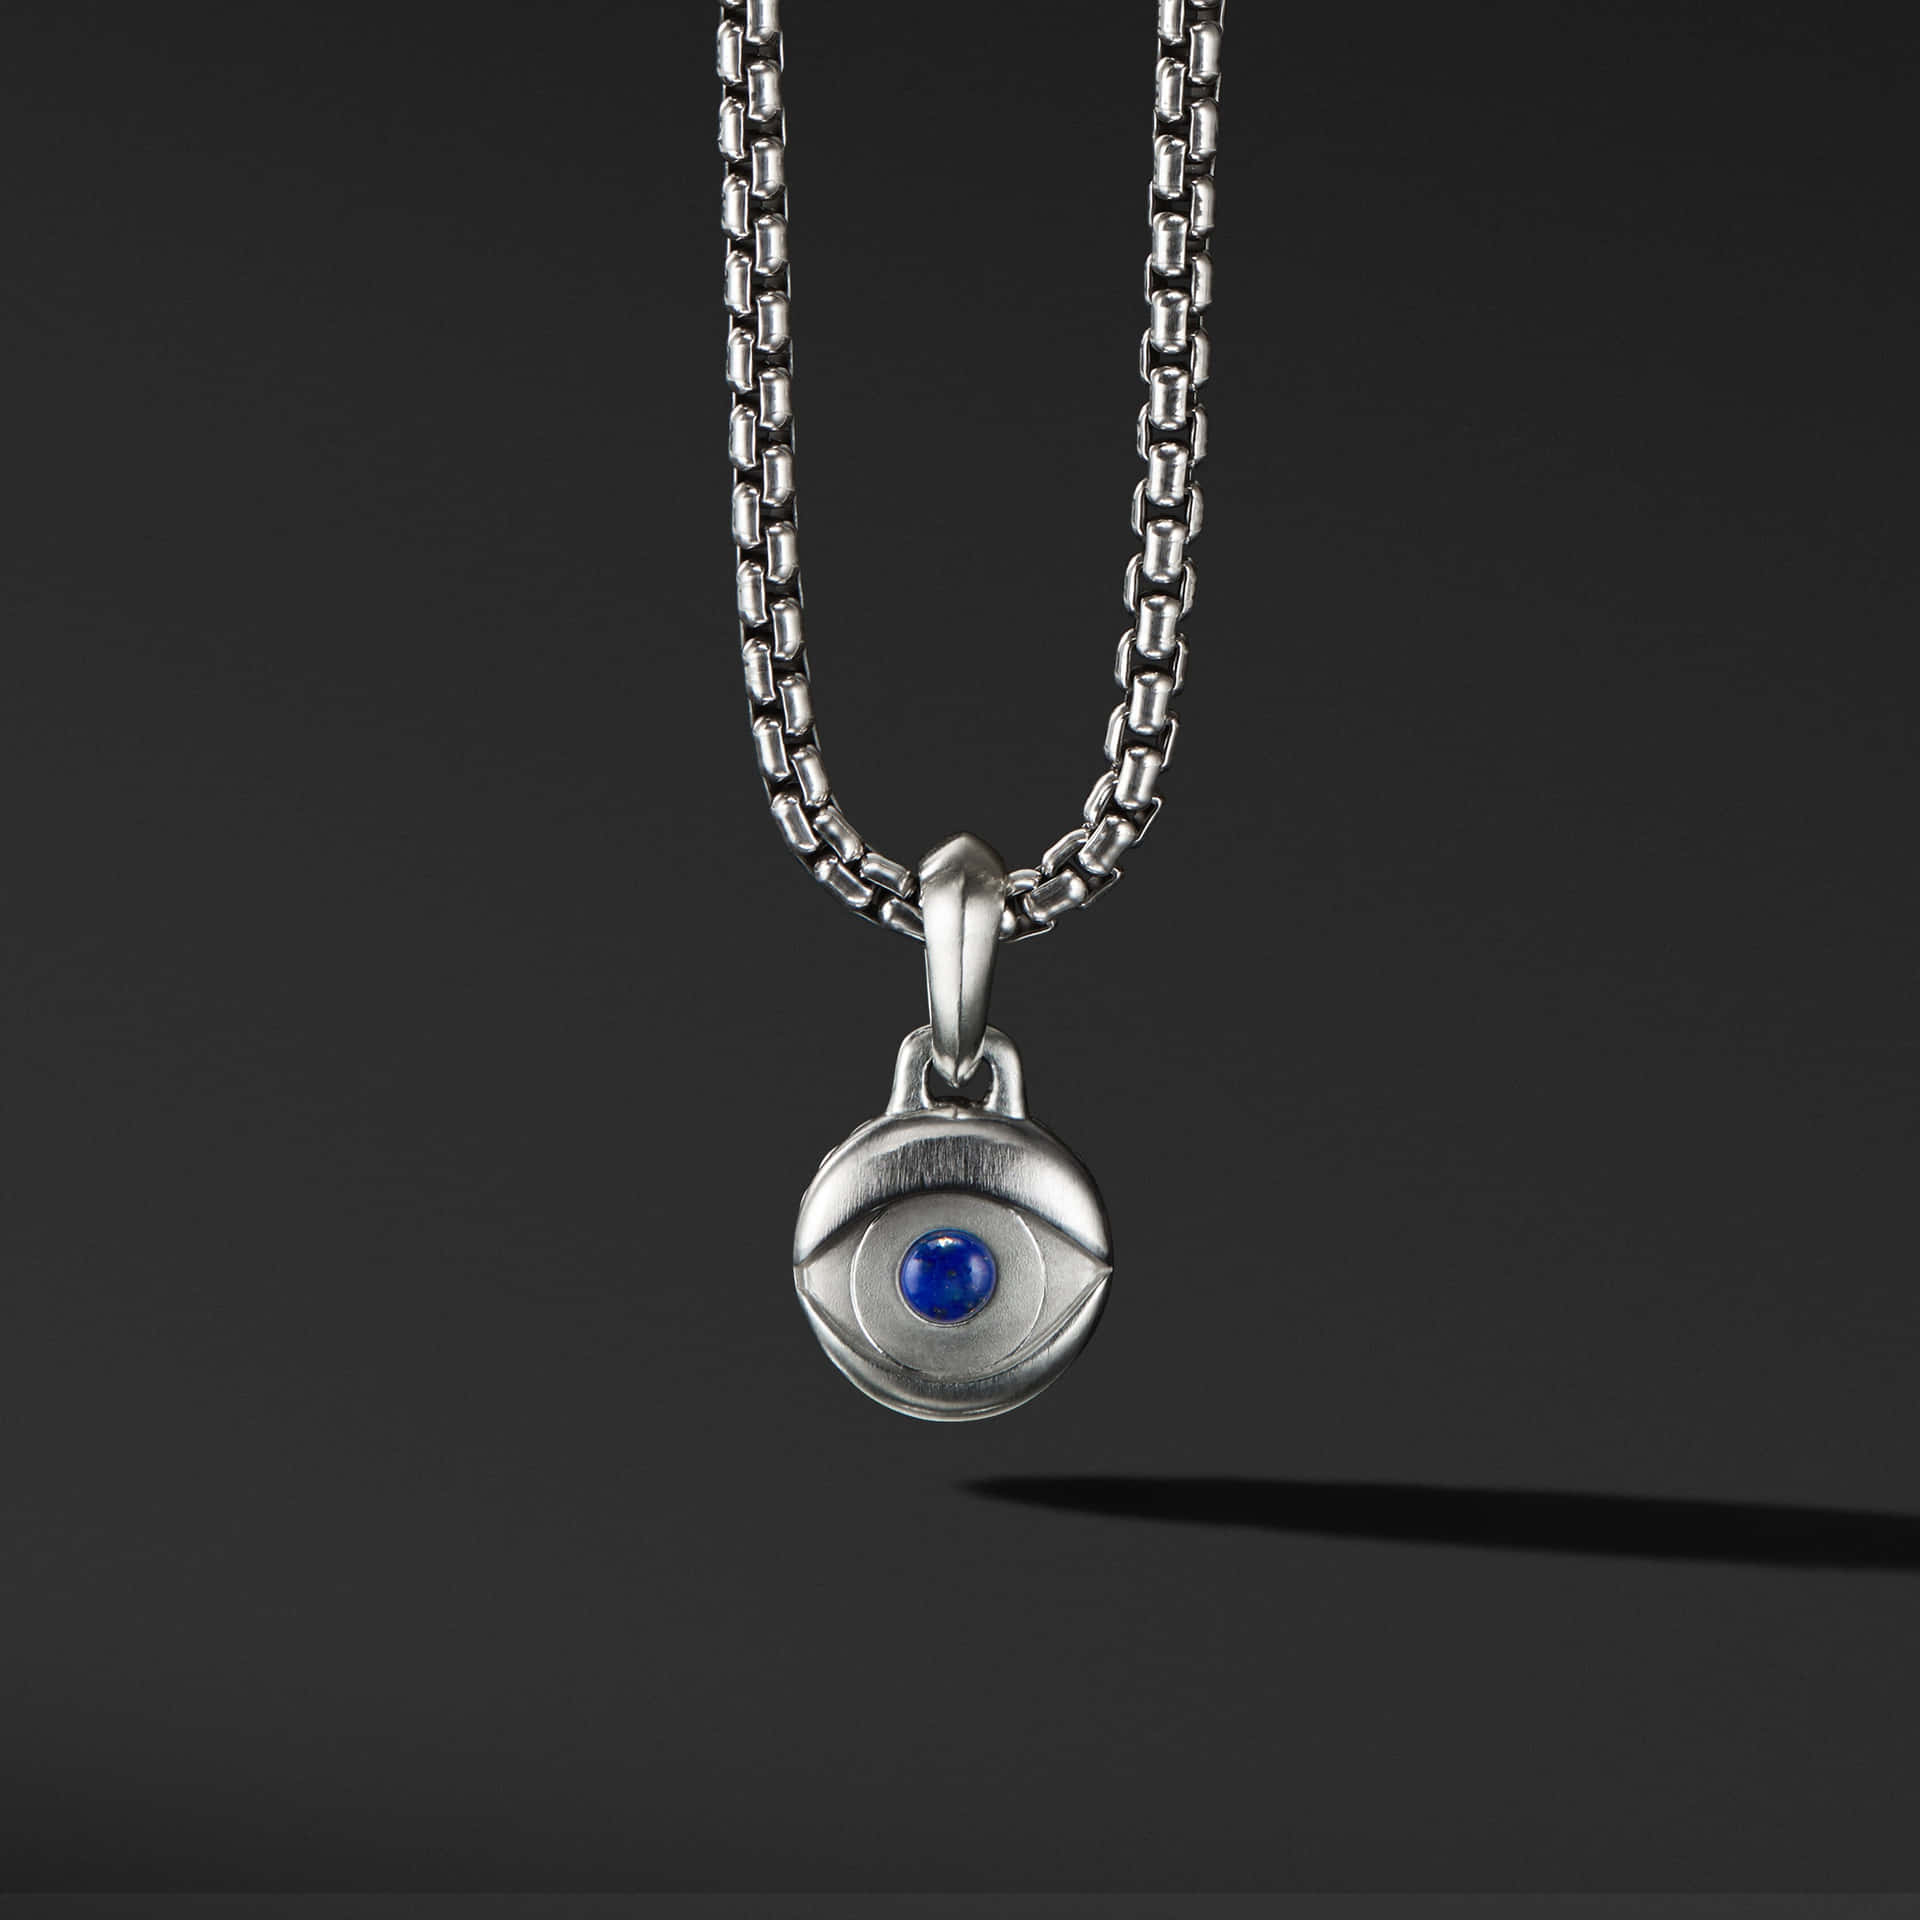 Don't test the power of the Evil Eye